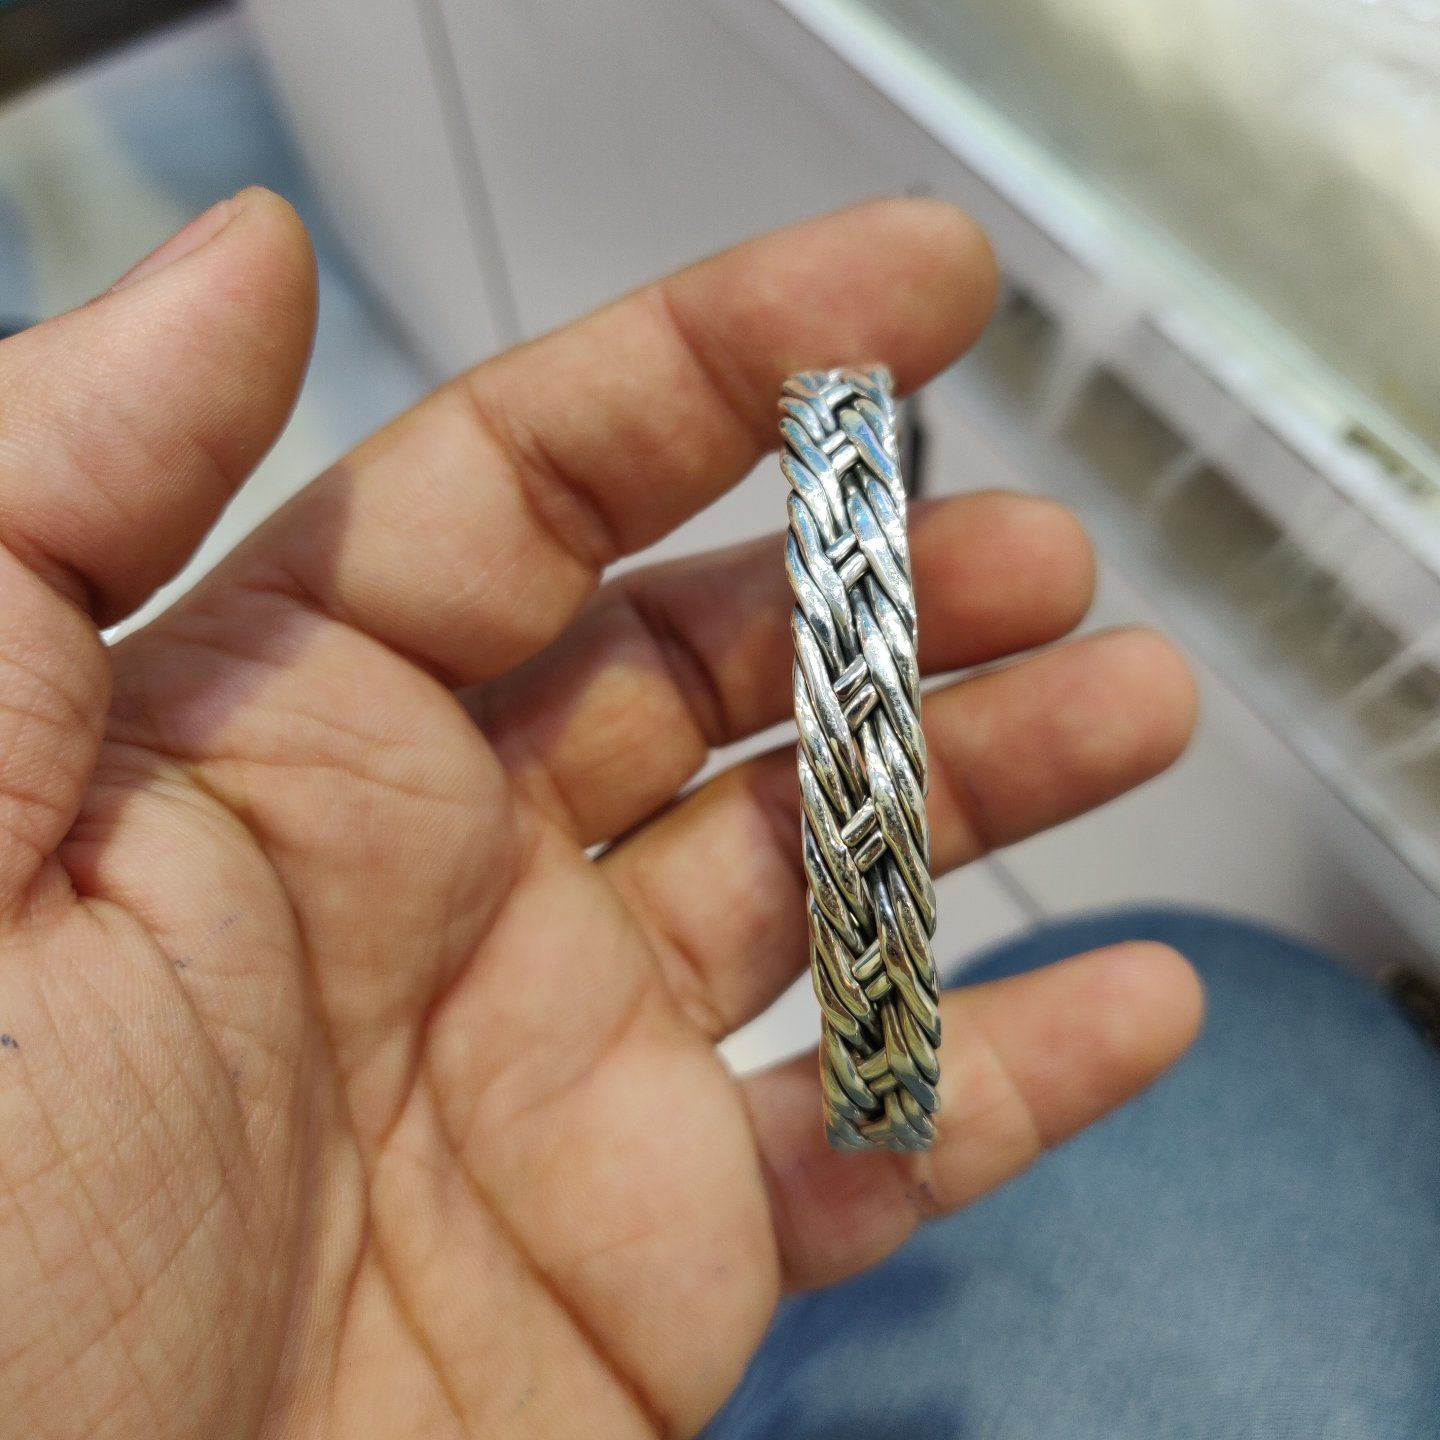 Braided & Plain Silver Links Bracelet – Sergio's Silver From Taxco